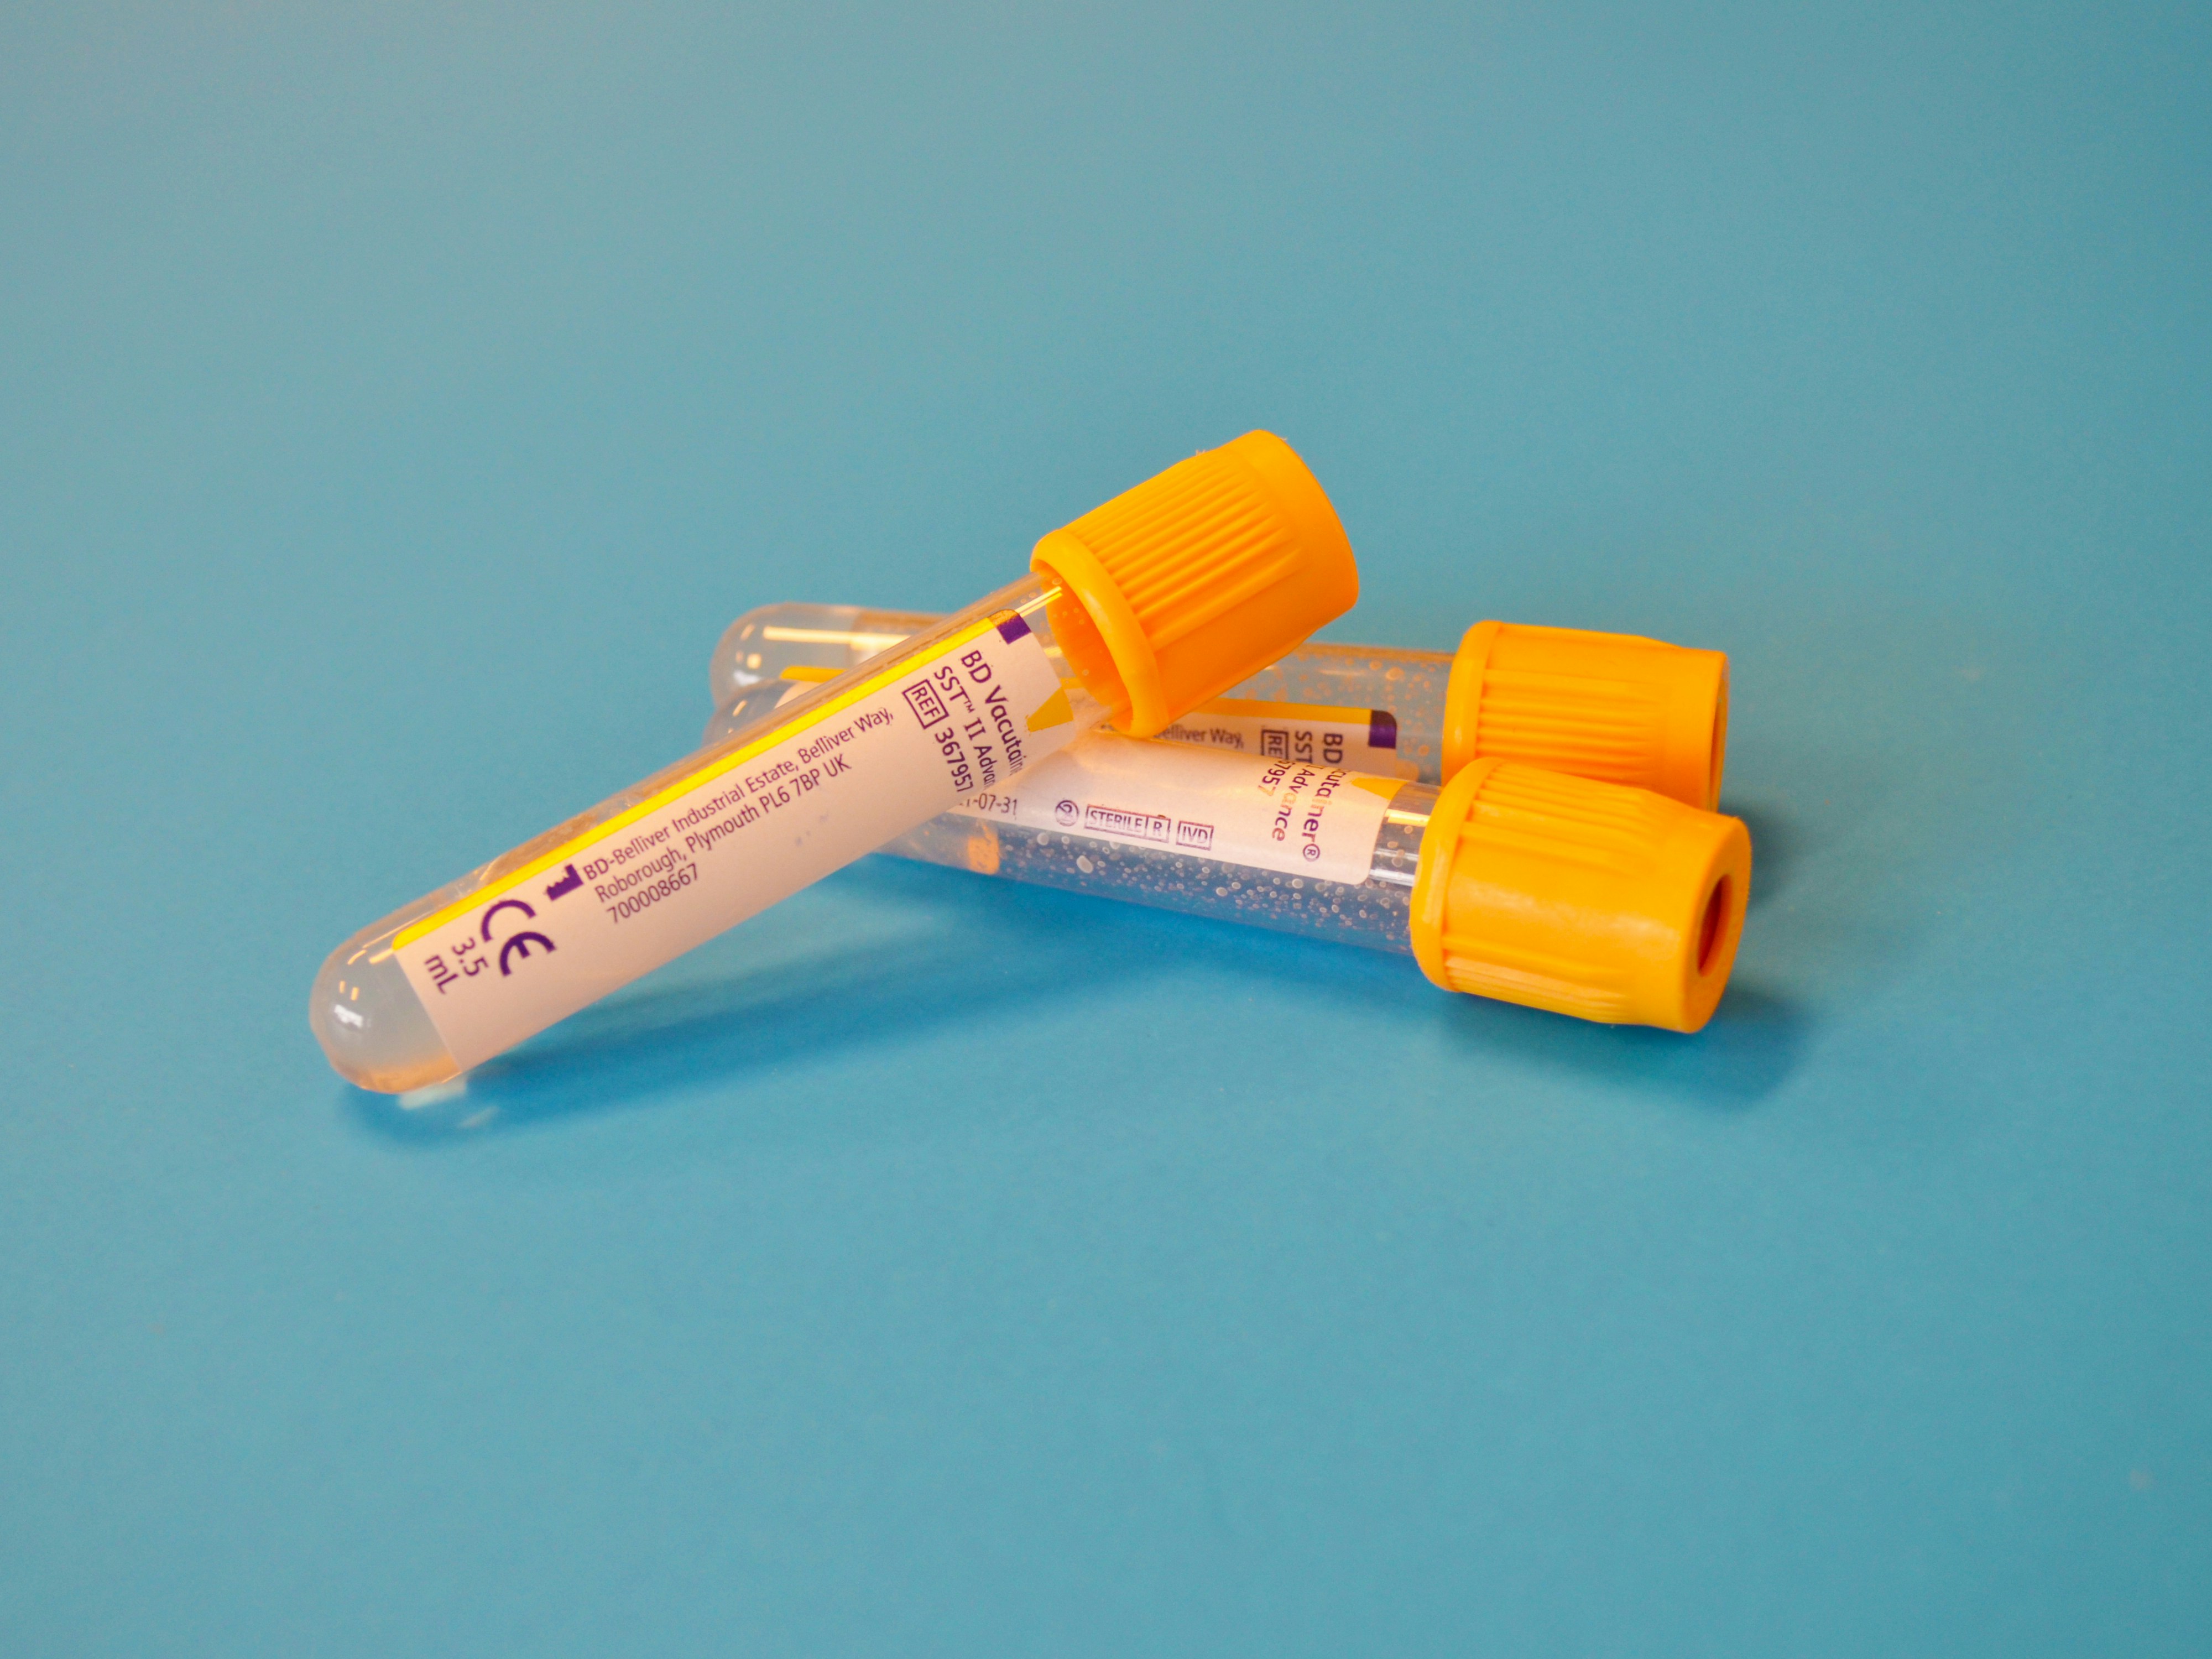 Tubes for the transportation of blood. BD Vacutainer.